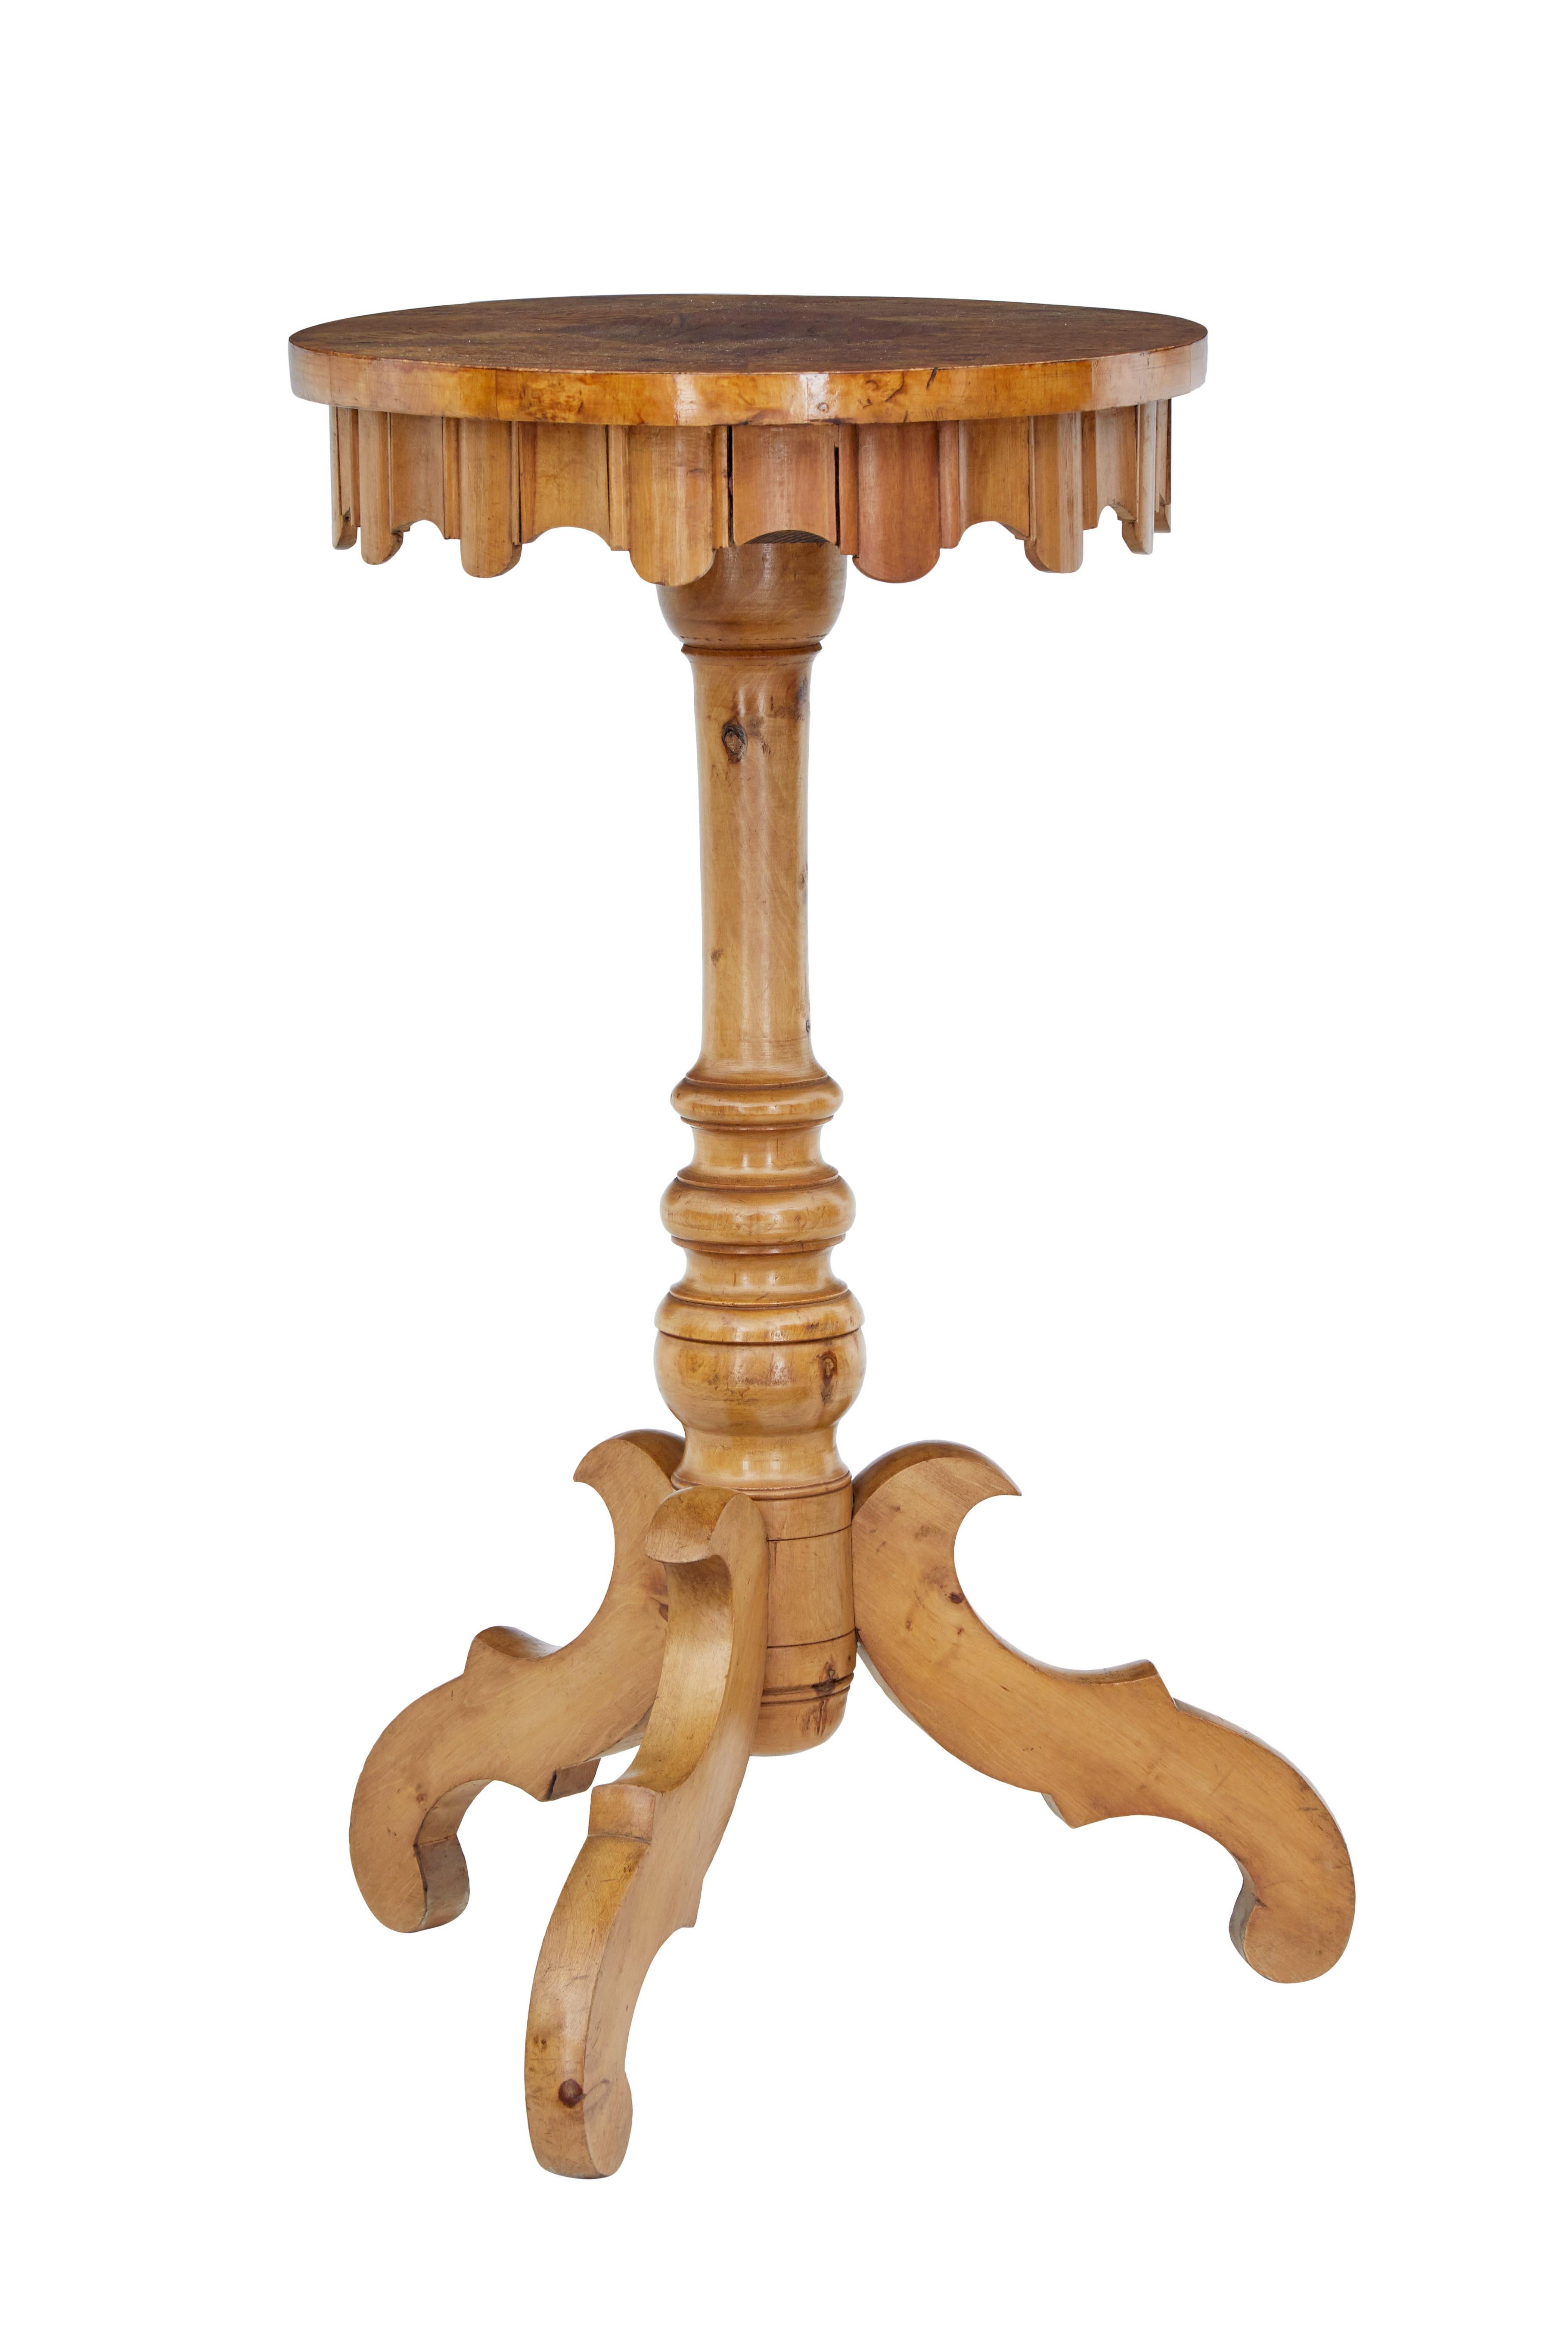 Oval Swedish occasional table, circa 1880.

Burr birch oval top with central elm veneered diamond, with scalloped frieze.

Standing on a turned stem with 3 scrolled legs.

Minor surface marks and light fading.